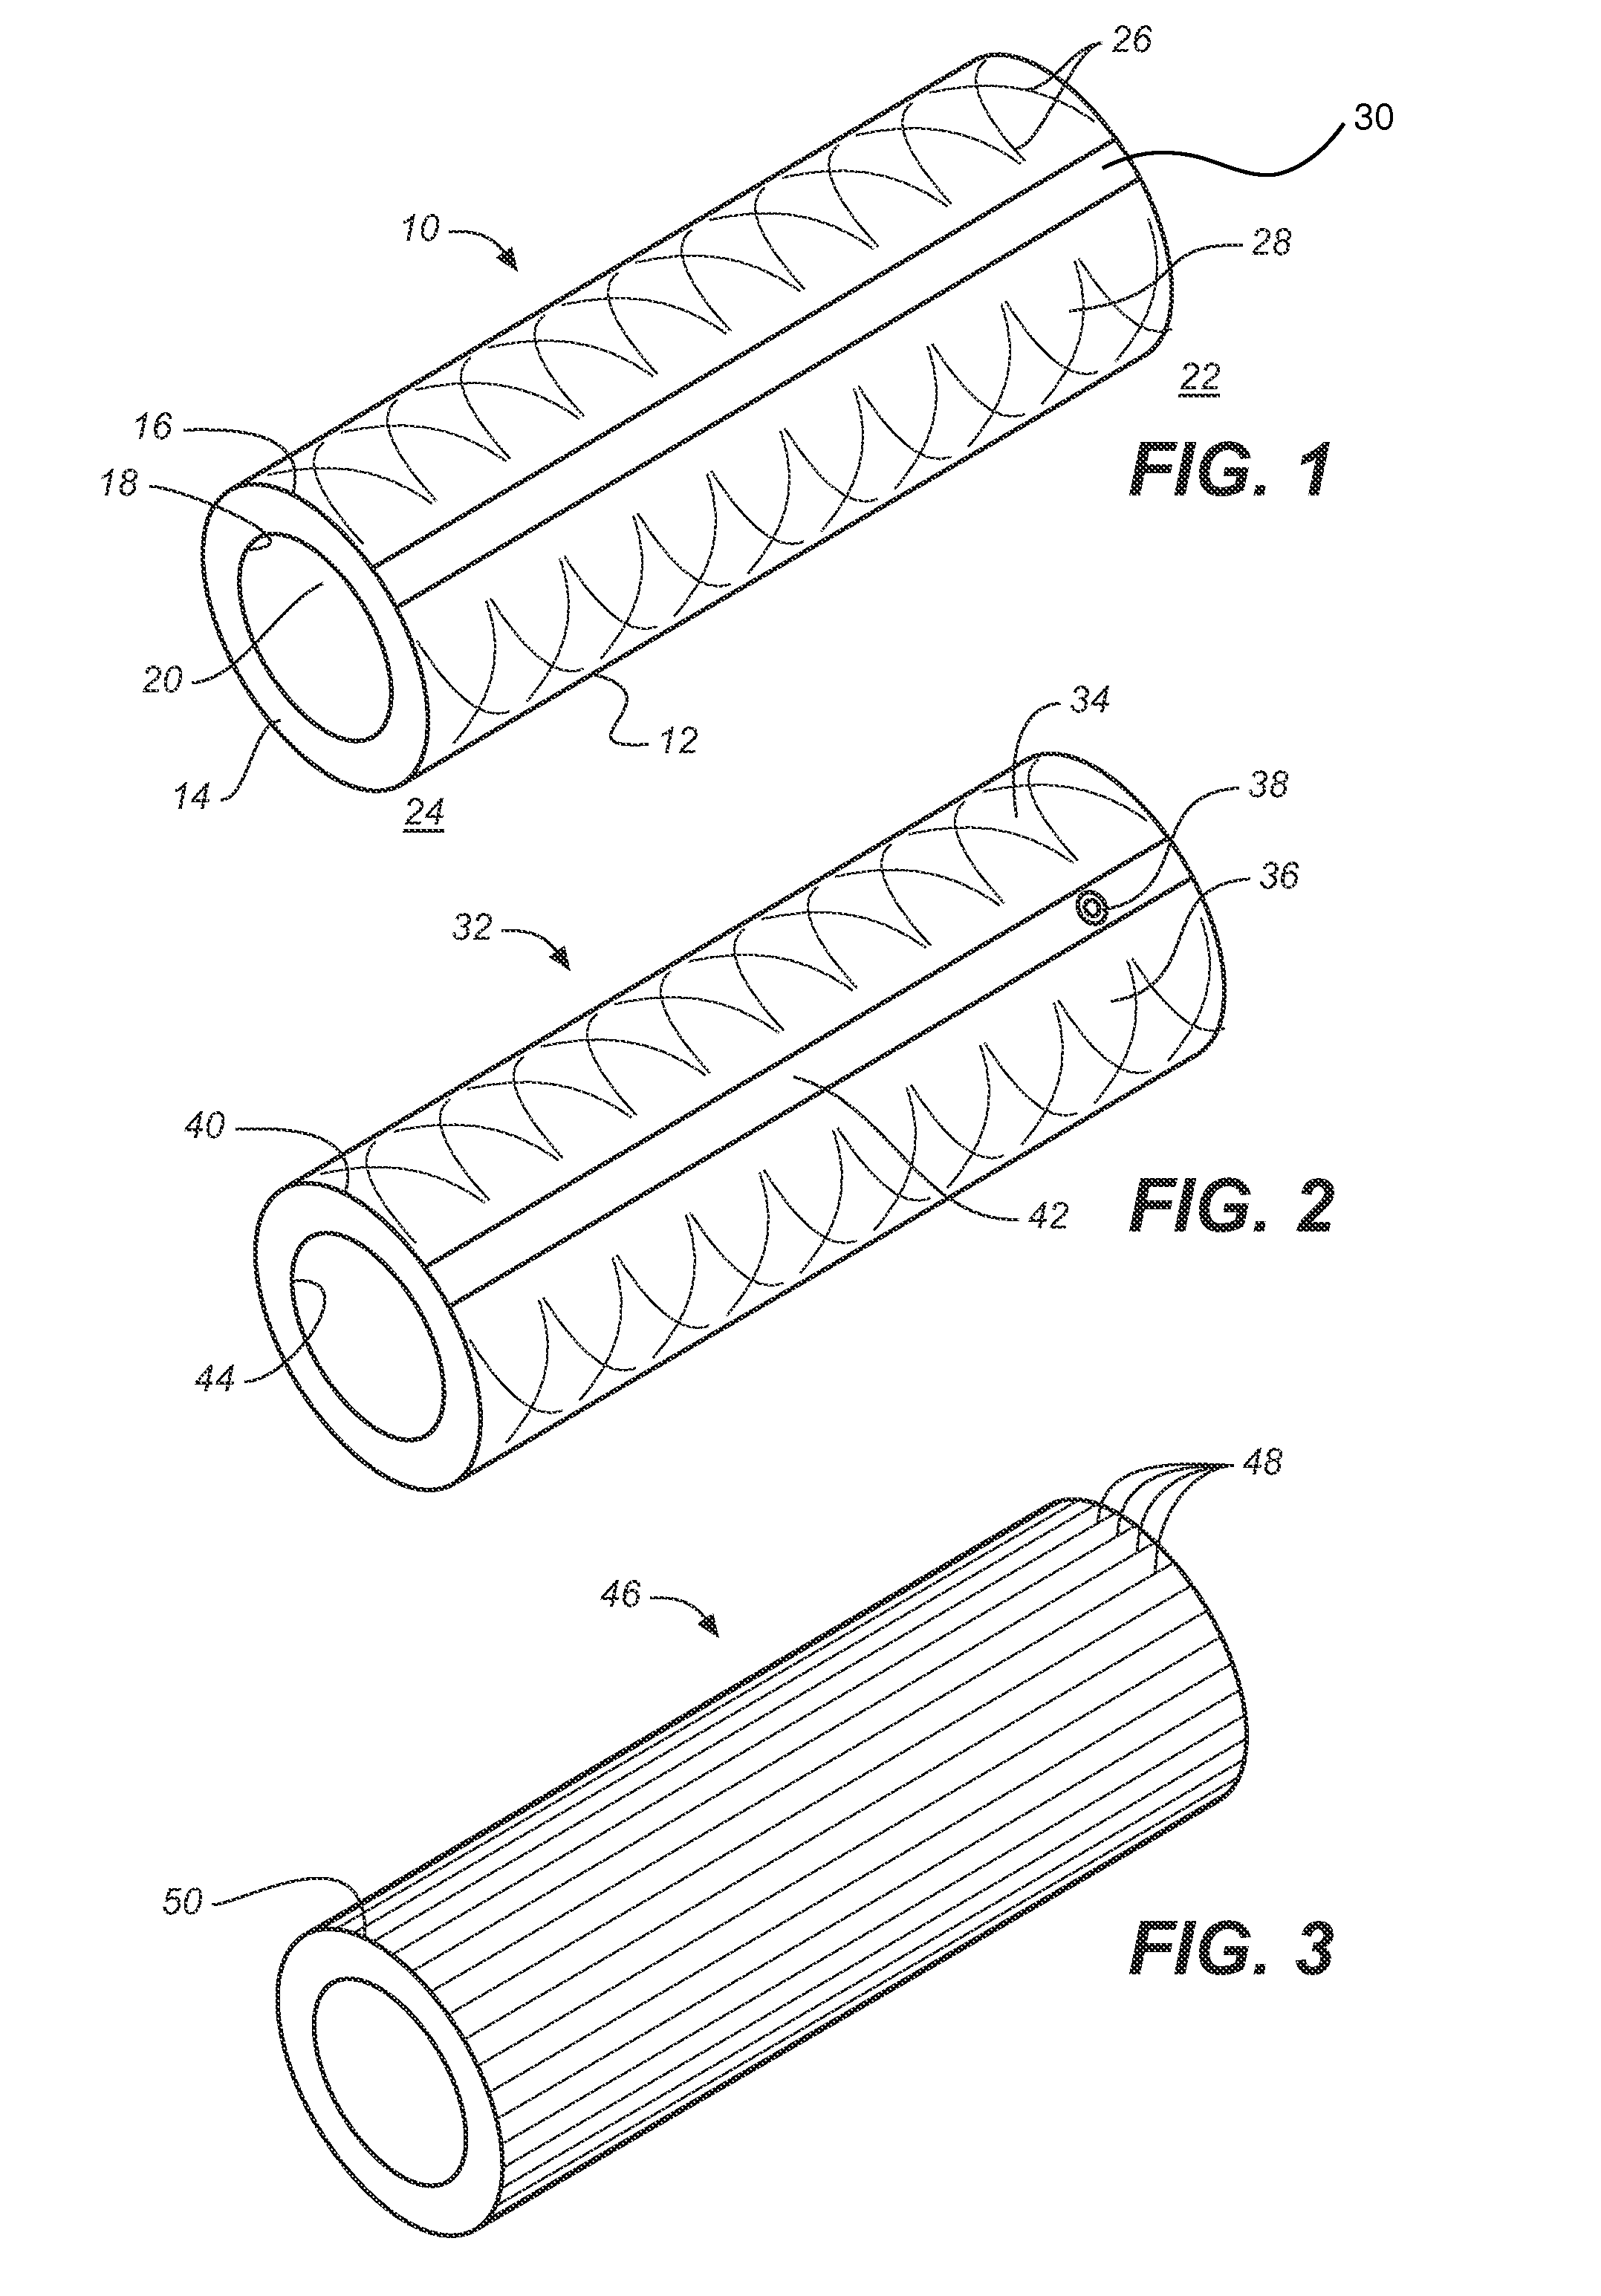 Electrochemical disinfection of implanted catheters